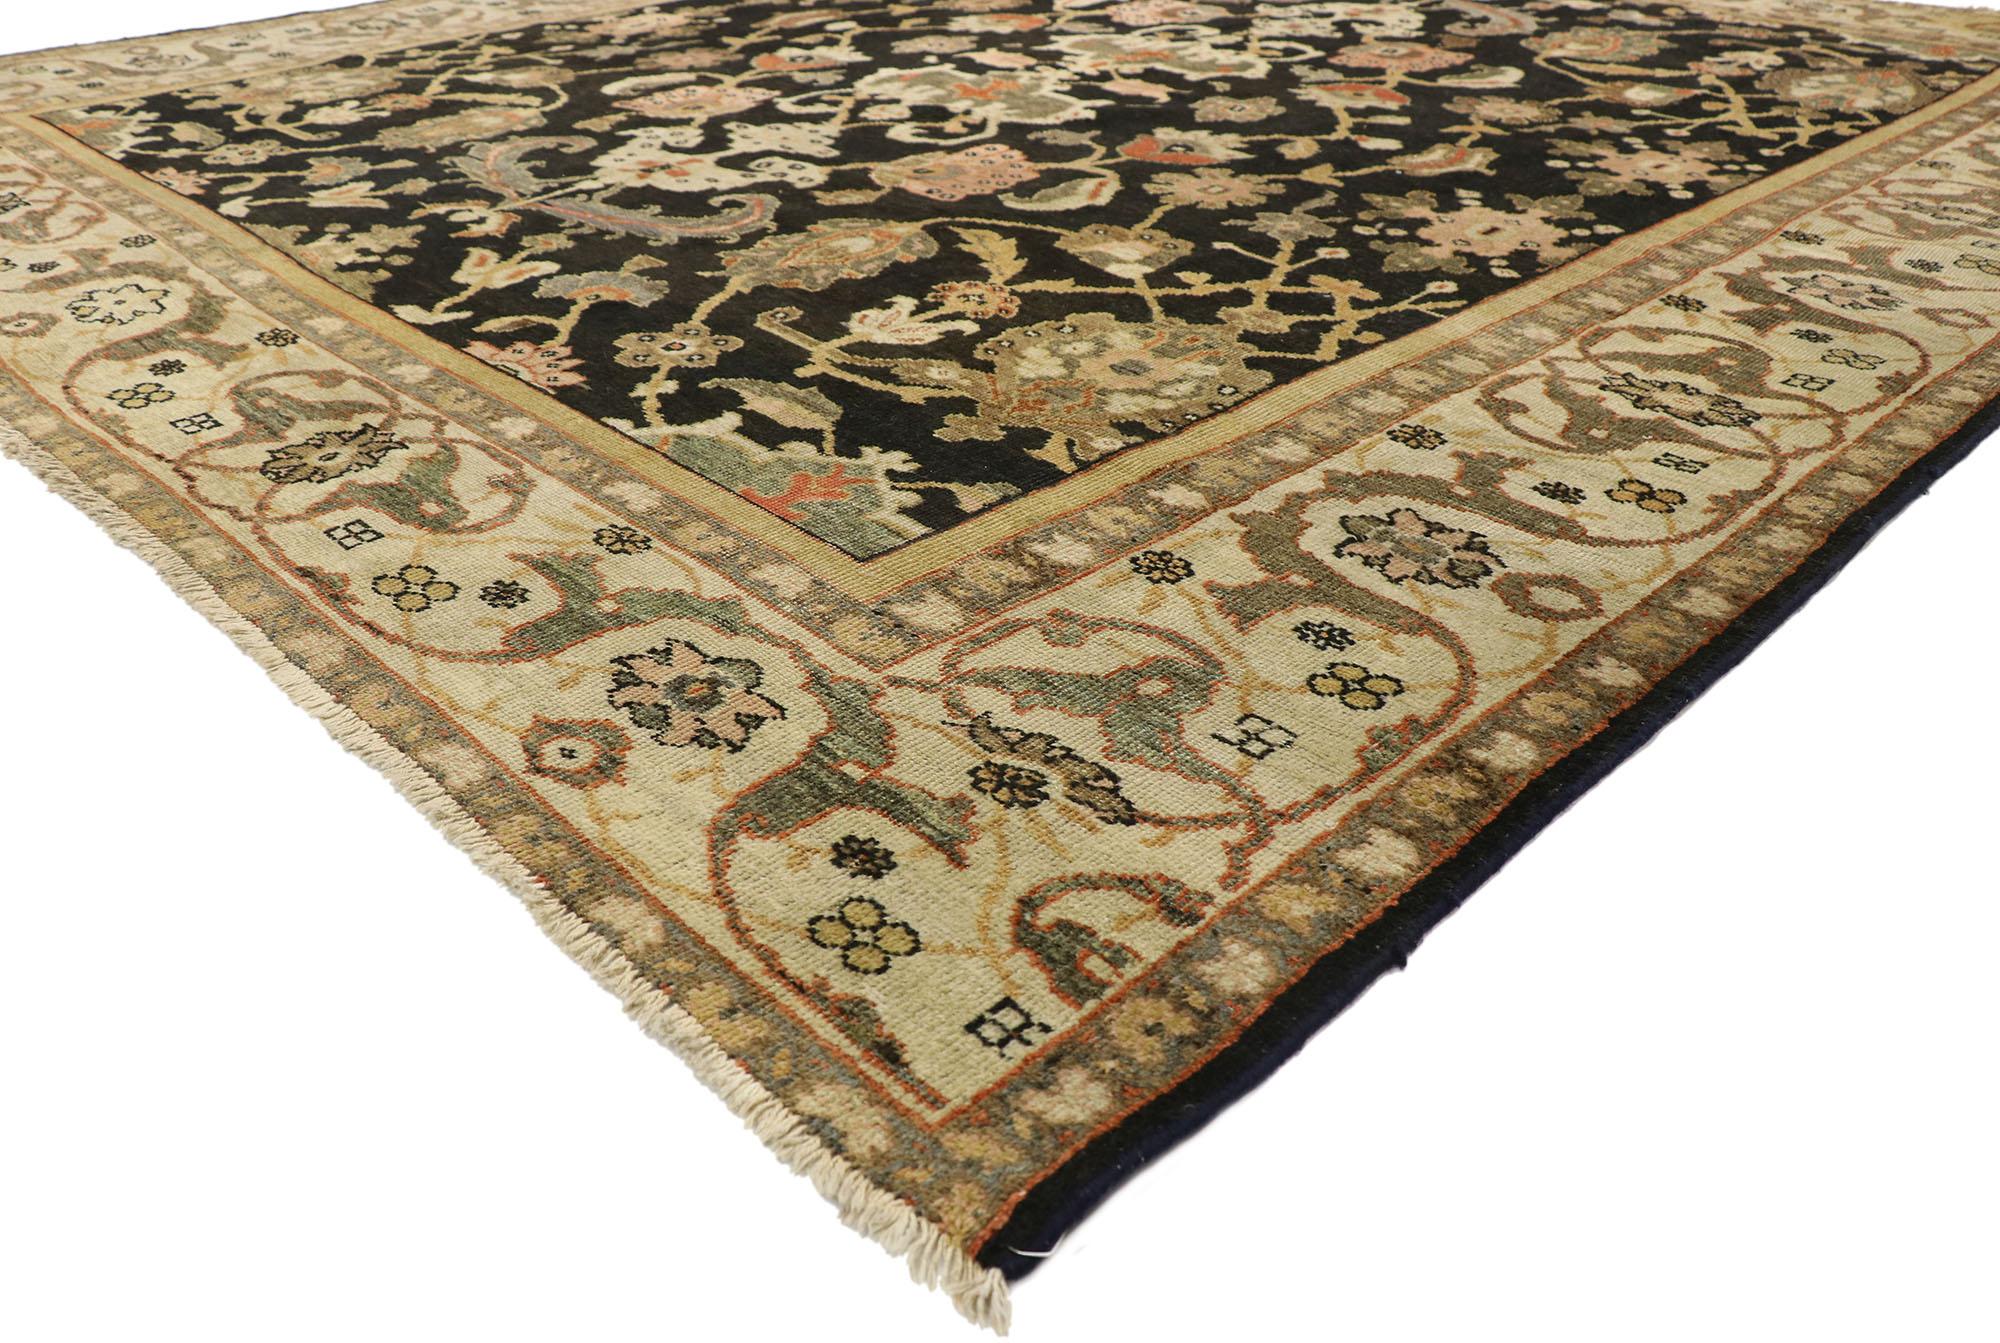 77104 Late 19th Century Antique Persian Black Sultanabad Rug with Regal Style 08'09 x 10'01. With its black backdrop and decadent detailing, this hand-knotted wool Late 19th Century antique Persian black Sultanabad rug beautifully embodies Regal